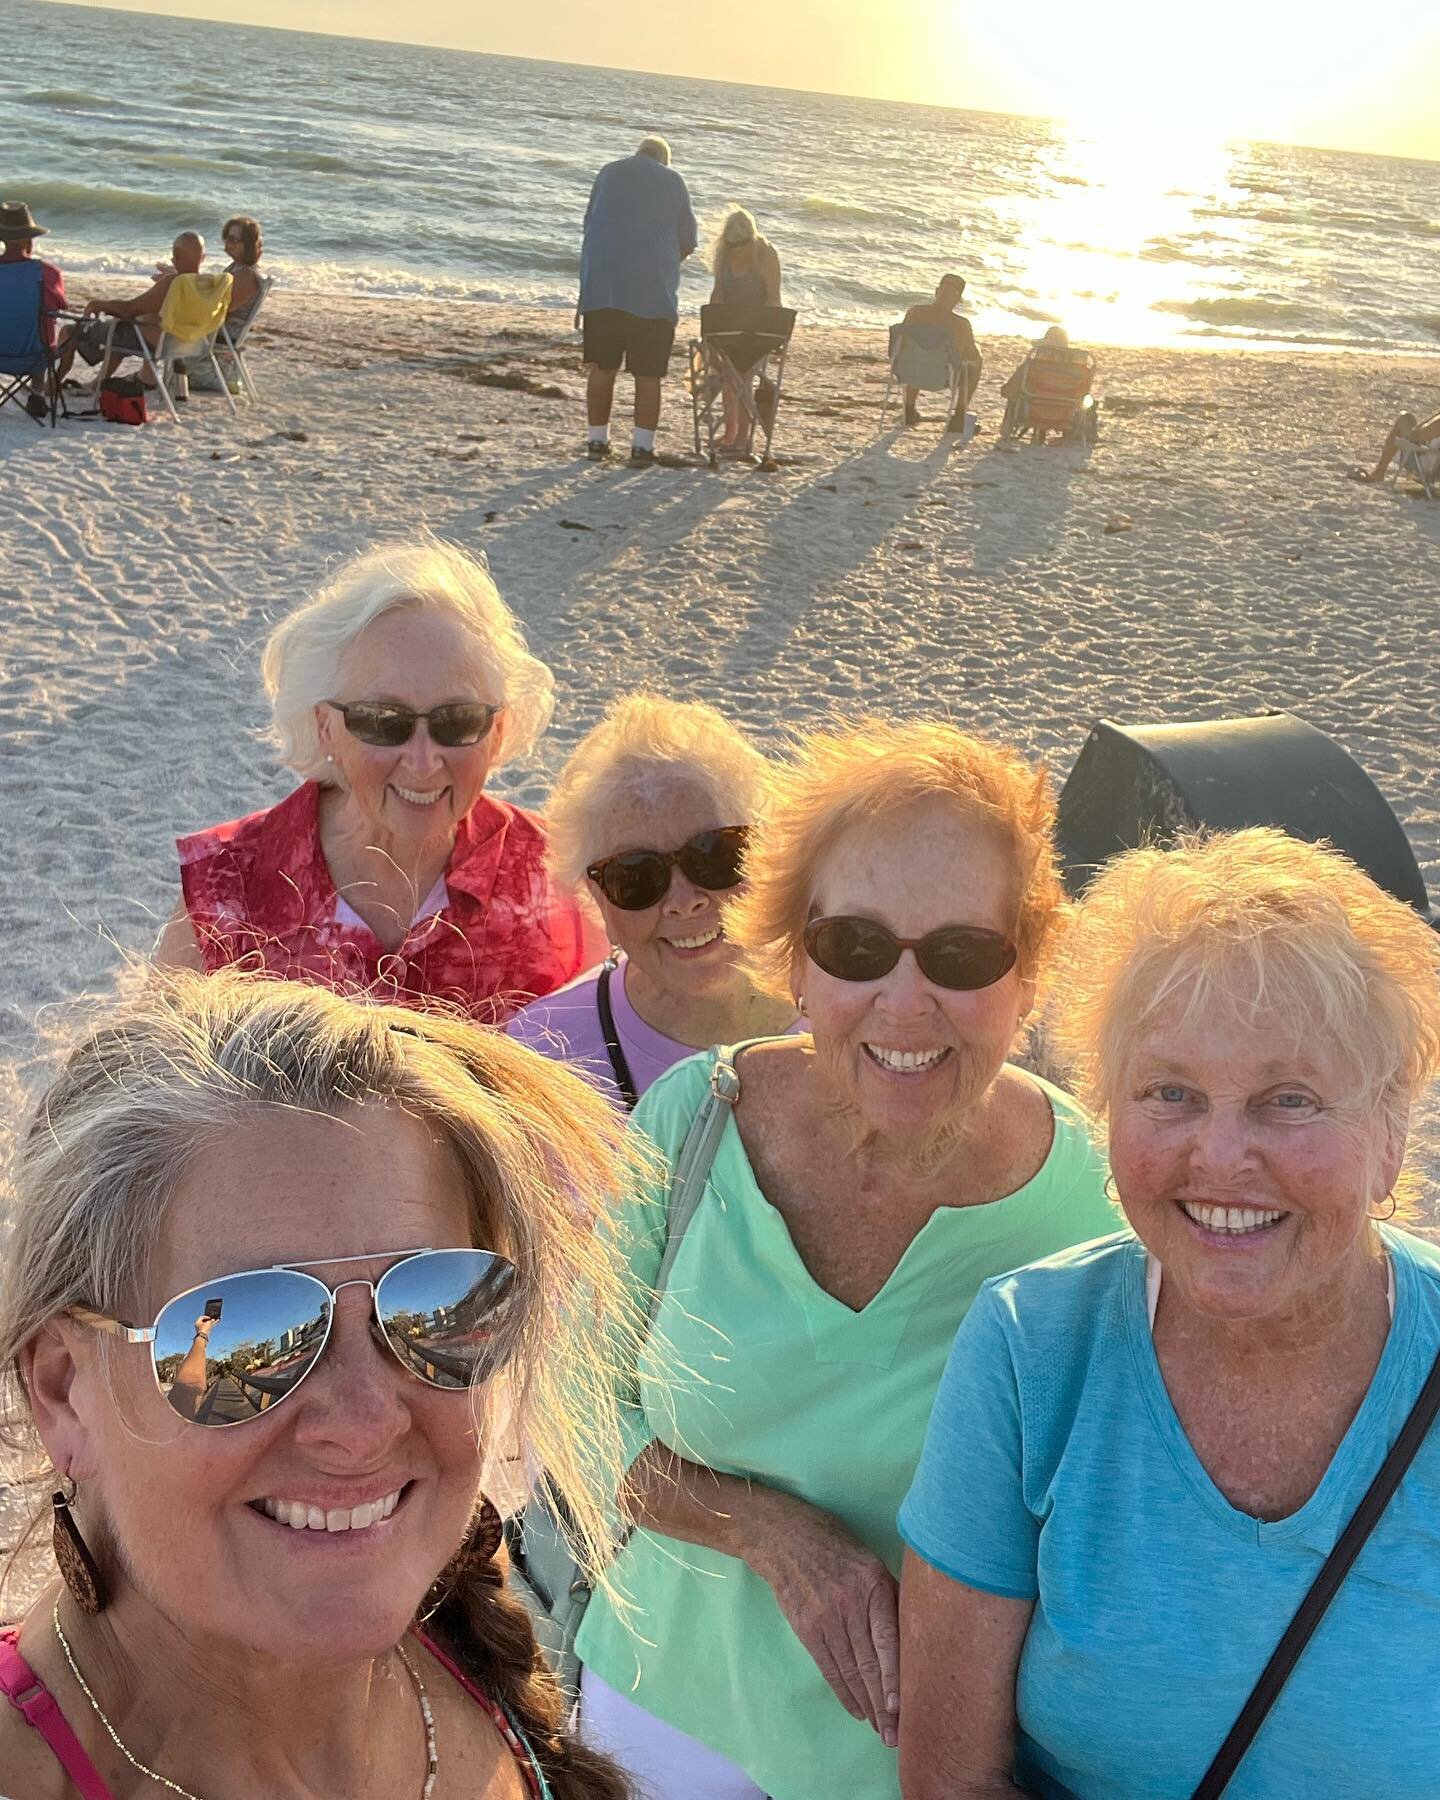 Annual Road Trip: Driving Miss Patty aka my mom!

Said goodbye to her sisters on Bonita Beach and following my passion explored new things and had some insightful conversations. 

Tasting new food while meeting @livewholeheart for lunch, stopping at 